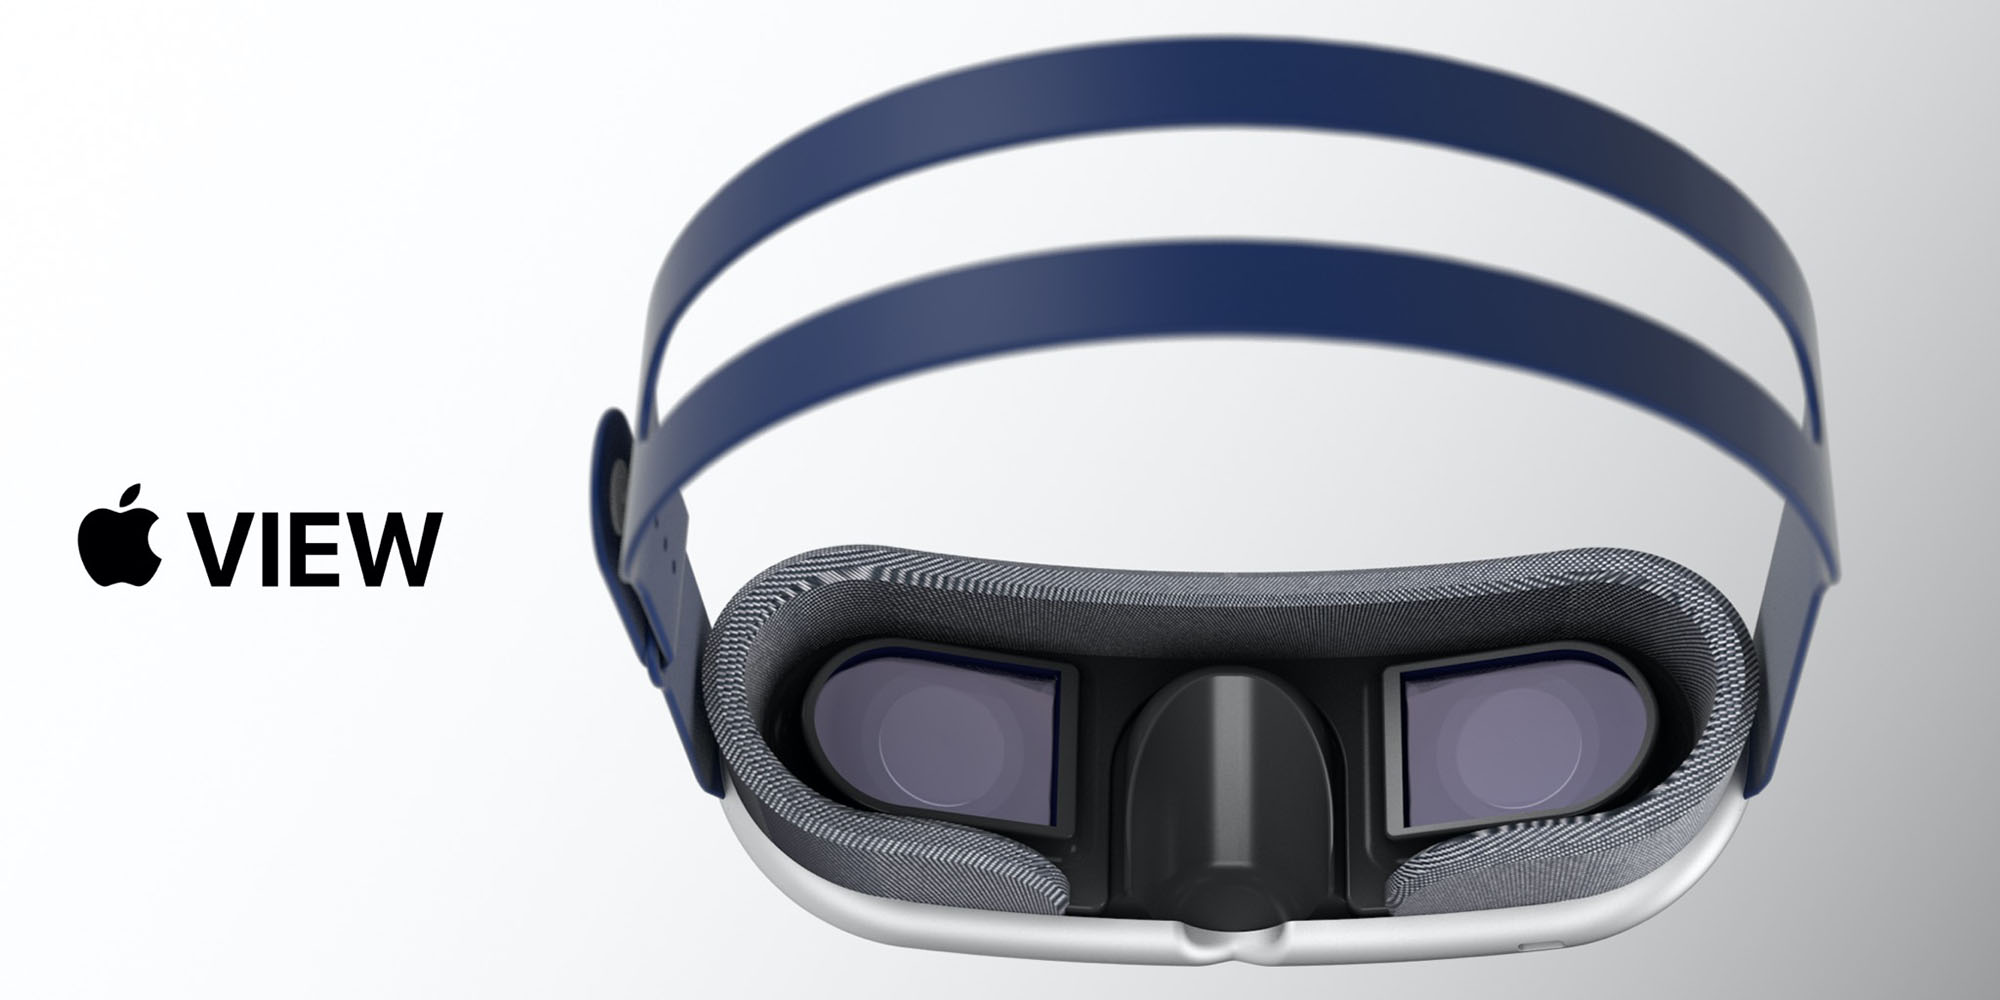 Apple's AR/VR headset could be priced above $2,000, feature M1 Pro-like  performance - 9to5Mac